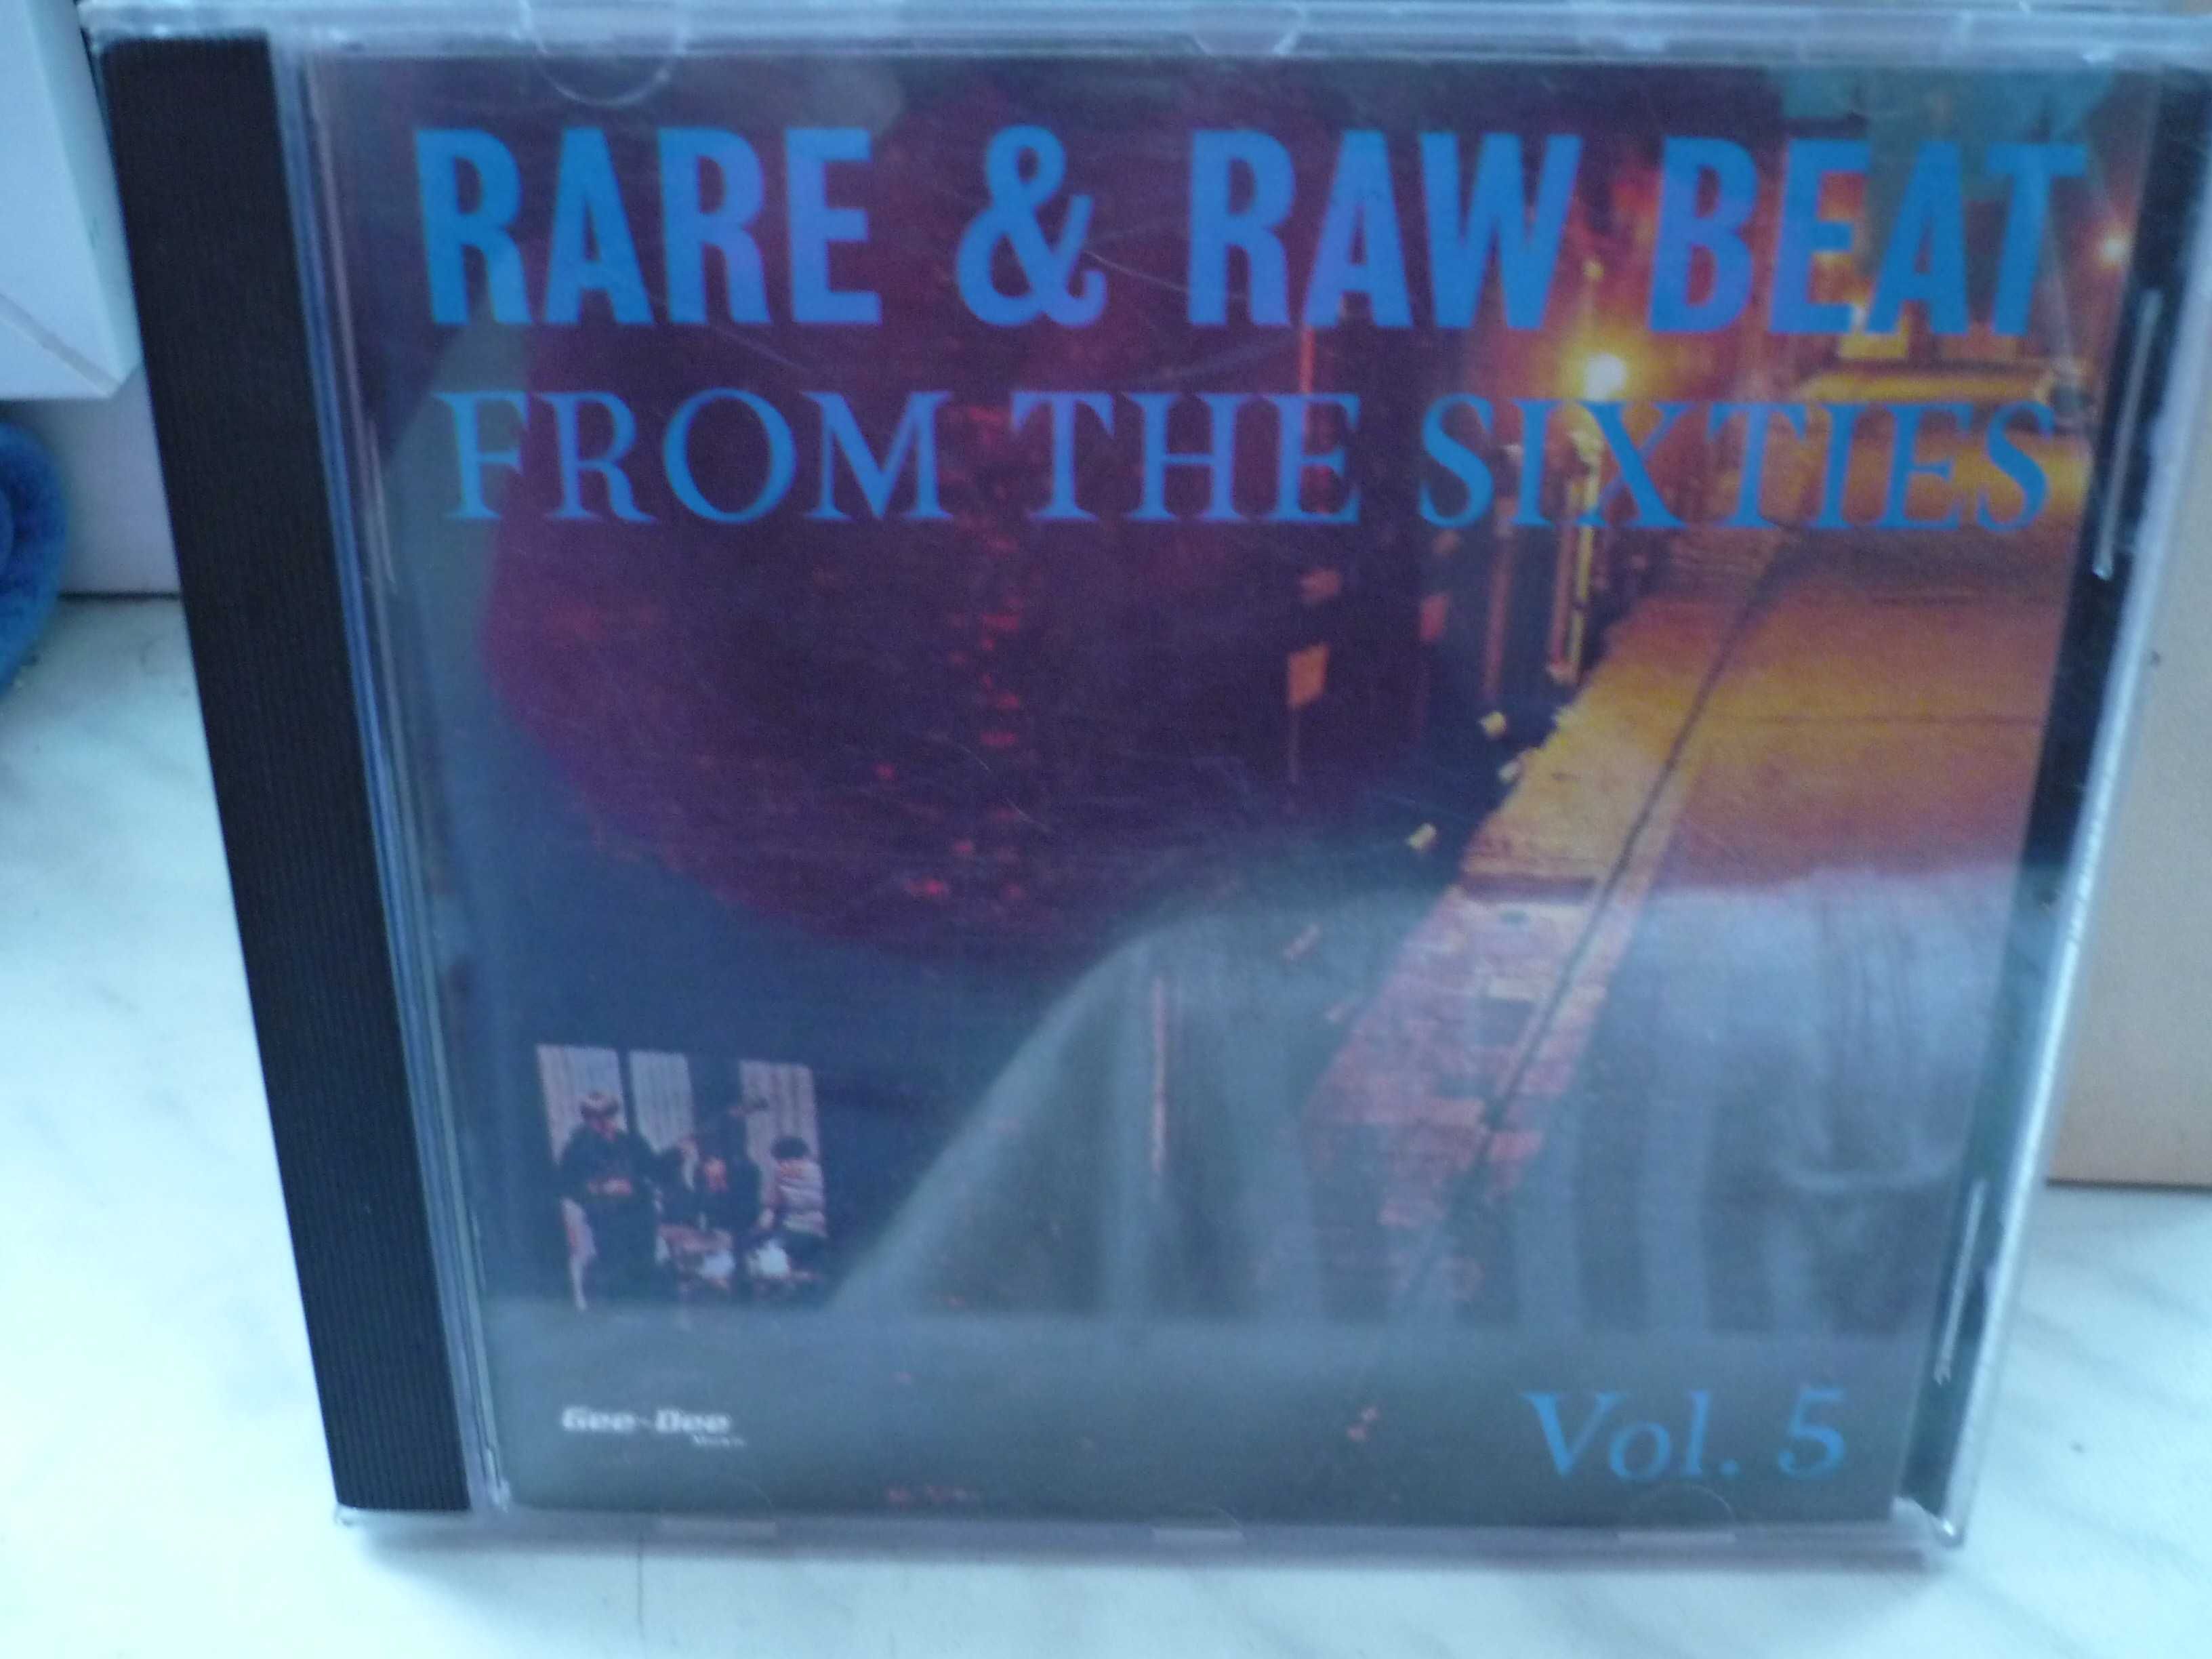 Rare & Raw Beat From The Sixties vol.5 , CD.